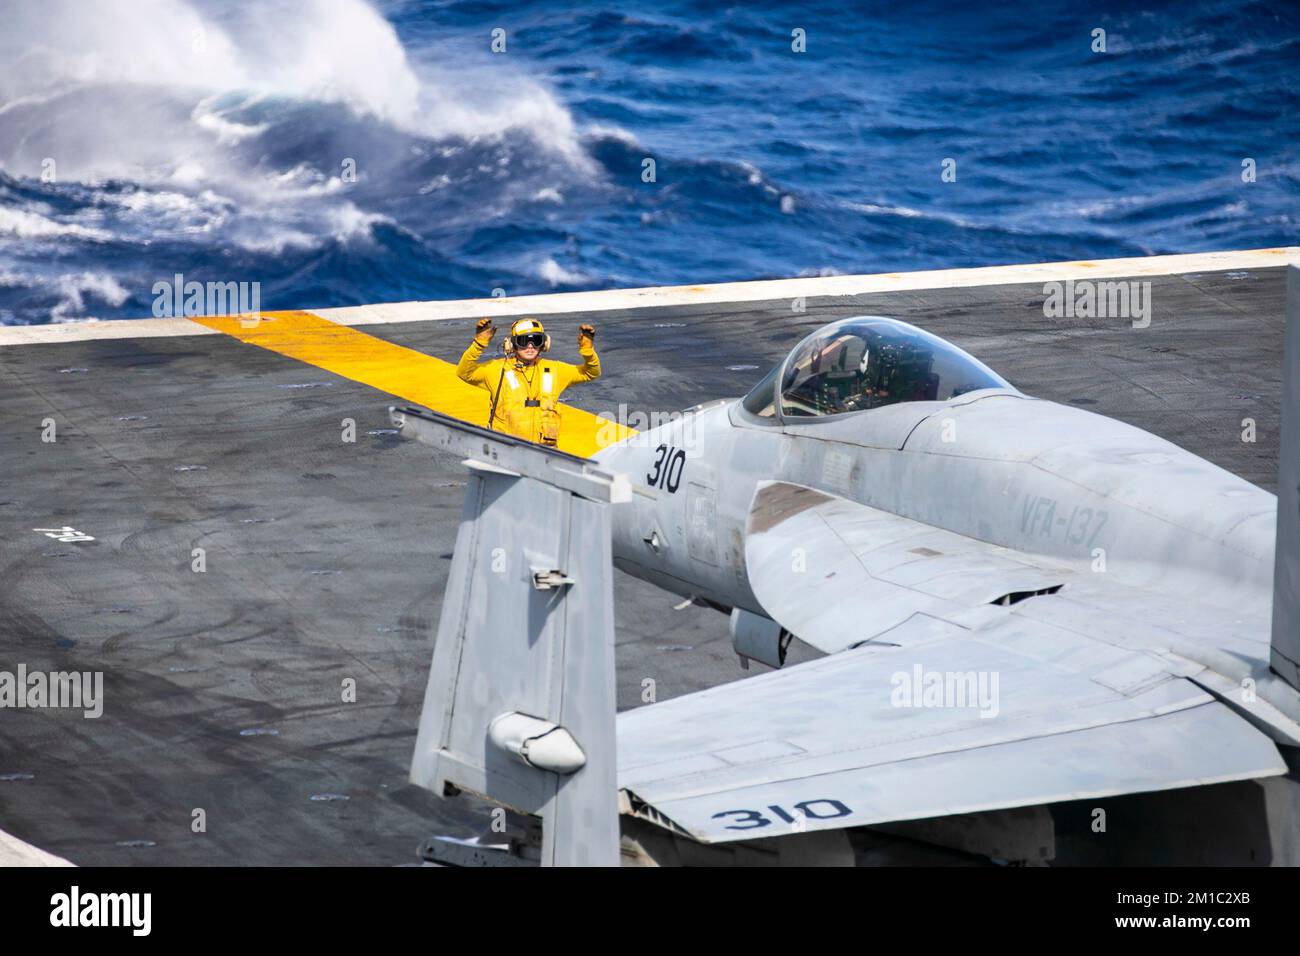 221210-N-AT895-1027 PACIFIC OCEAN (Dec. 10, 2022) A U.S. Navy Aviation Boatswain's Mate (Handling) directs an F/A-18E Super Hornet from the “Kestrels” of Strike Fighter Squadron (VFA) 137 on the flight deck of the aircraft carrier USS Nimitz (CVN 68). Nimitz is underway conducting routine operations. (U.S. Navy photo by Mass Communication Specialist 1st Class Nathan Laird) Stock Photo